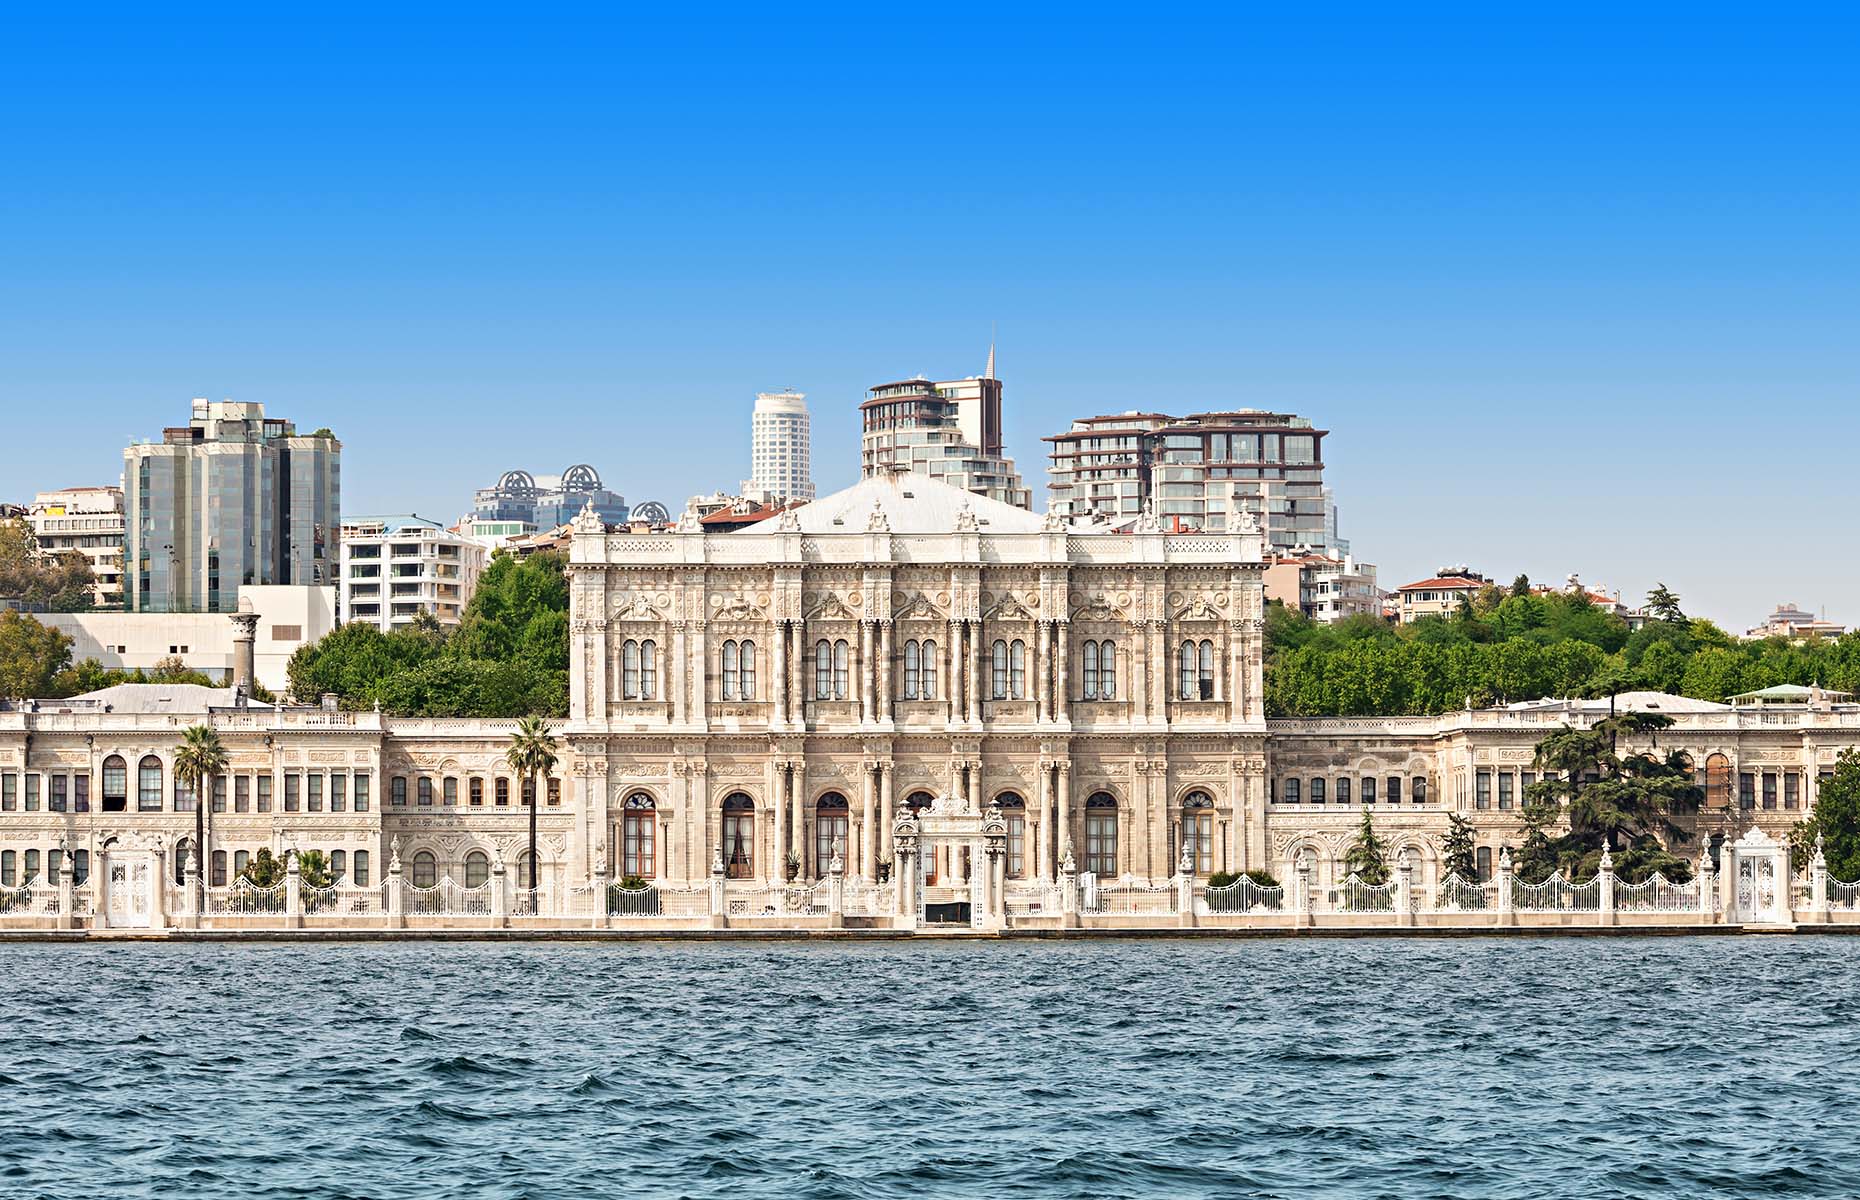 Dolmabahce Palace in Istanbul (Image: saiko3p/Shutterstock)